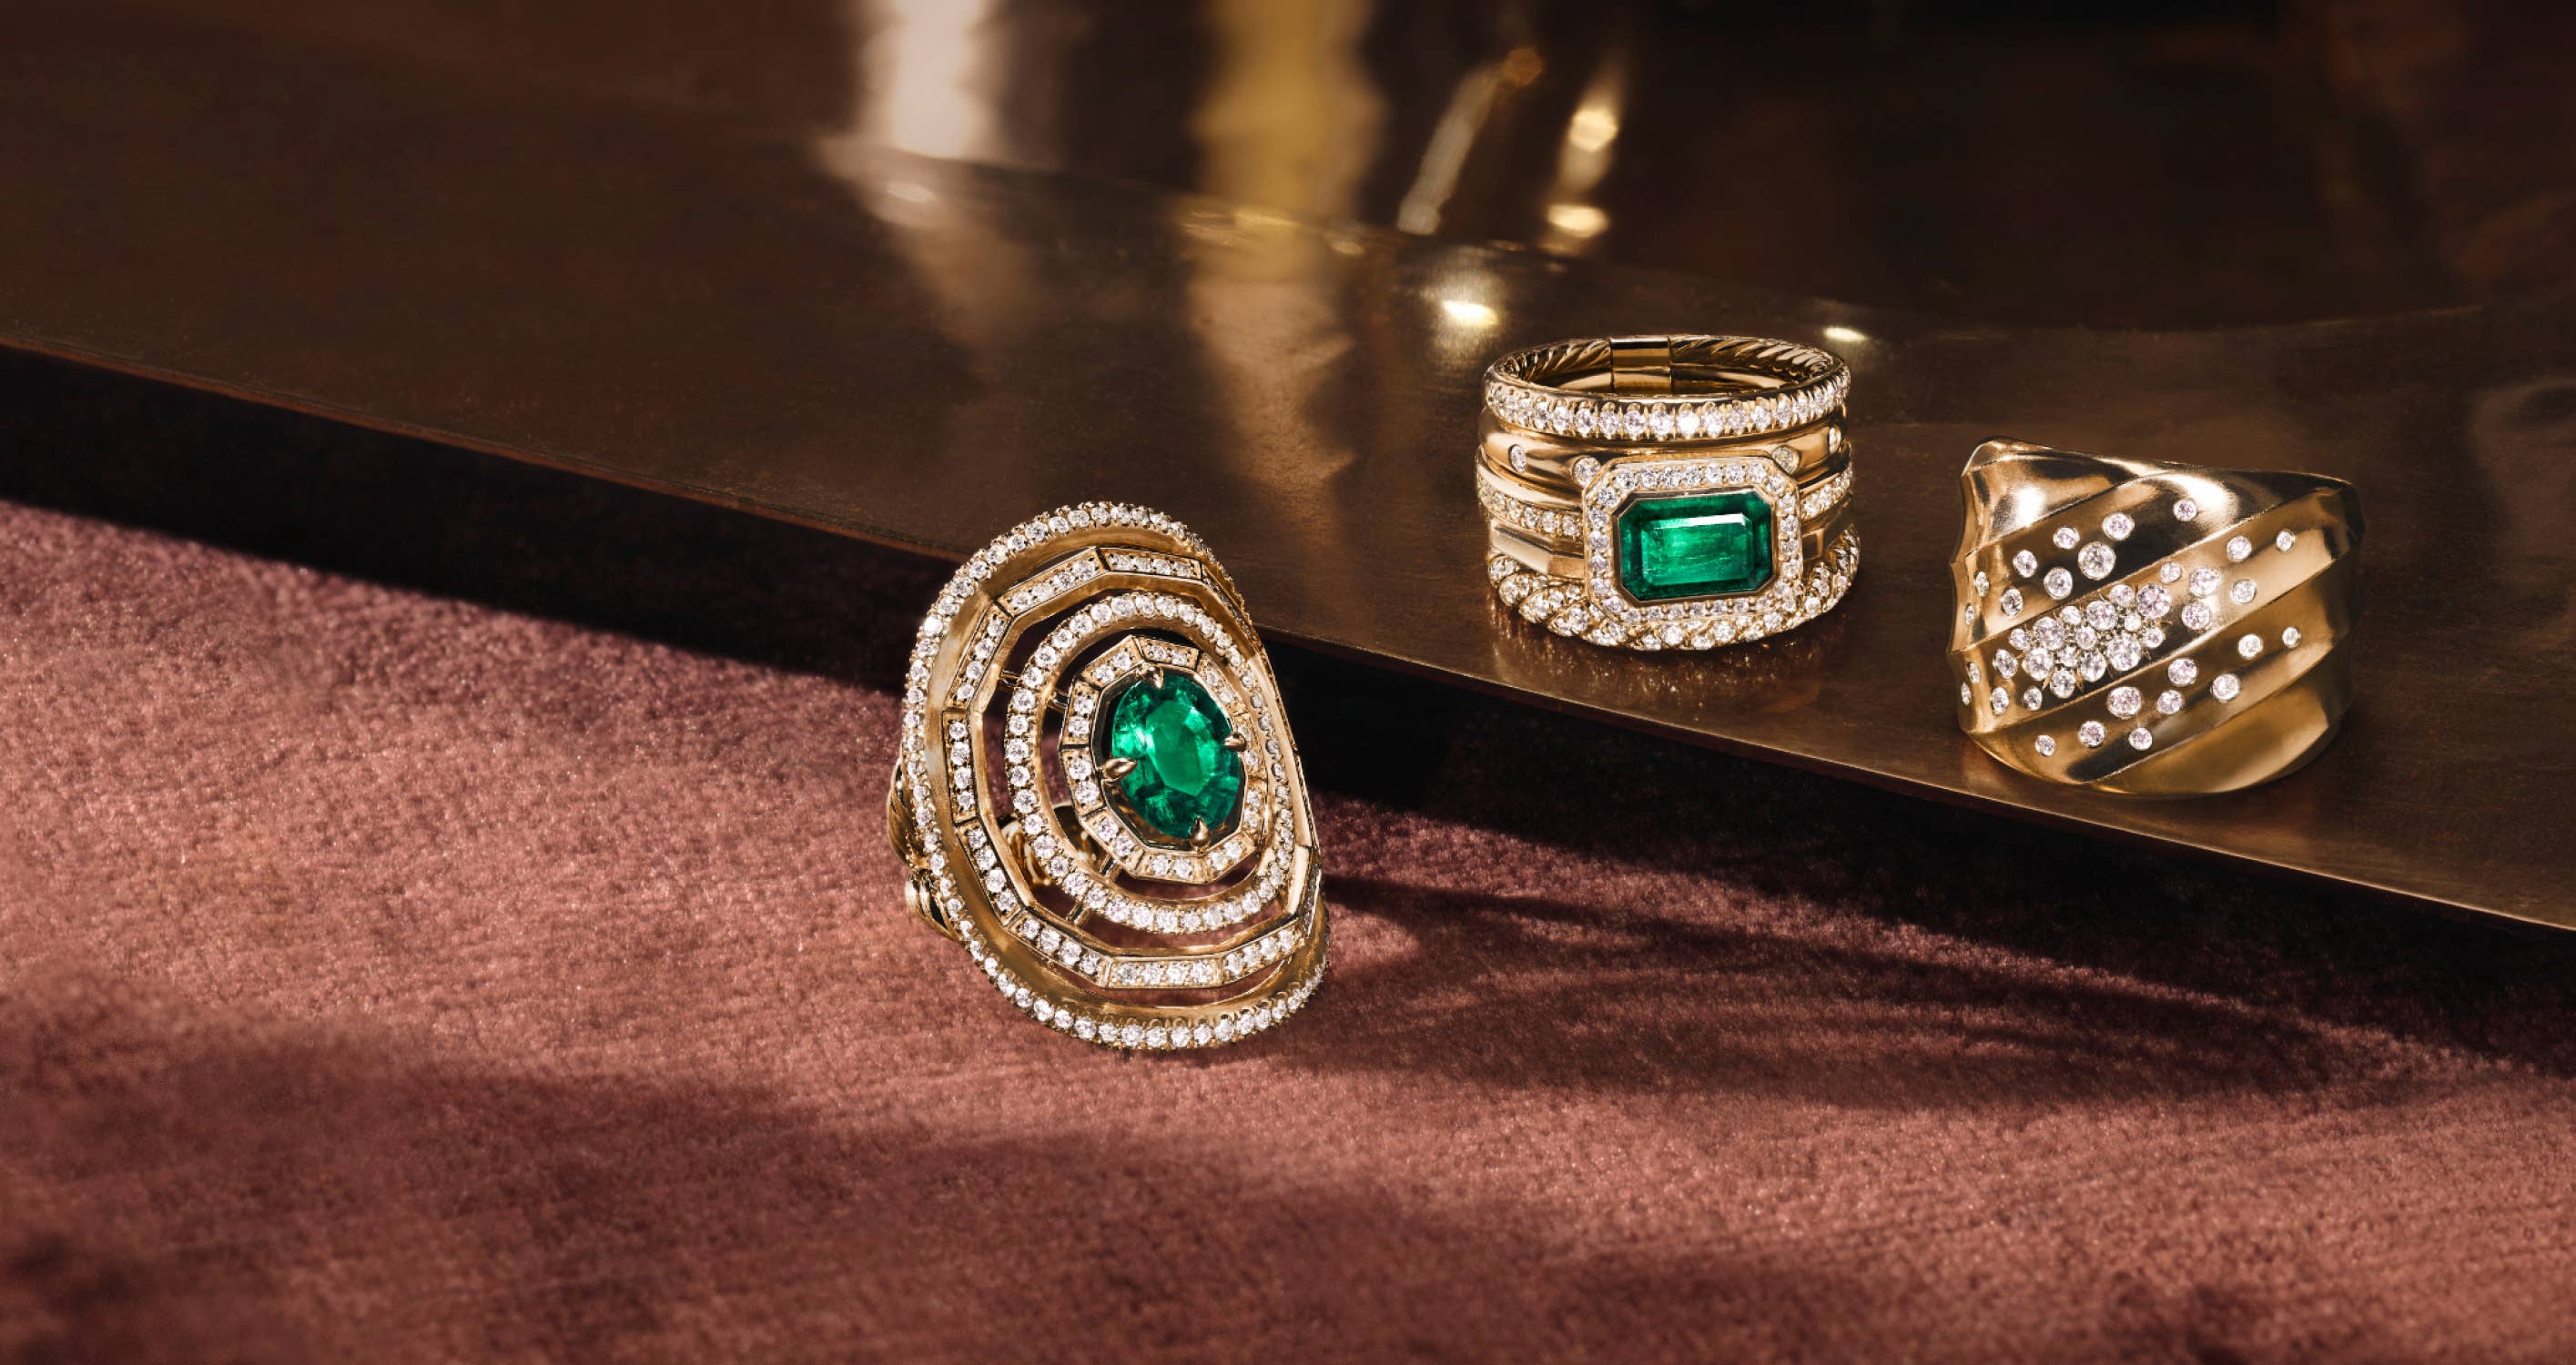 Gift Guide for her - Modern David Yurman gold rings with emerald and diamond stones.